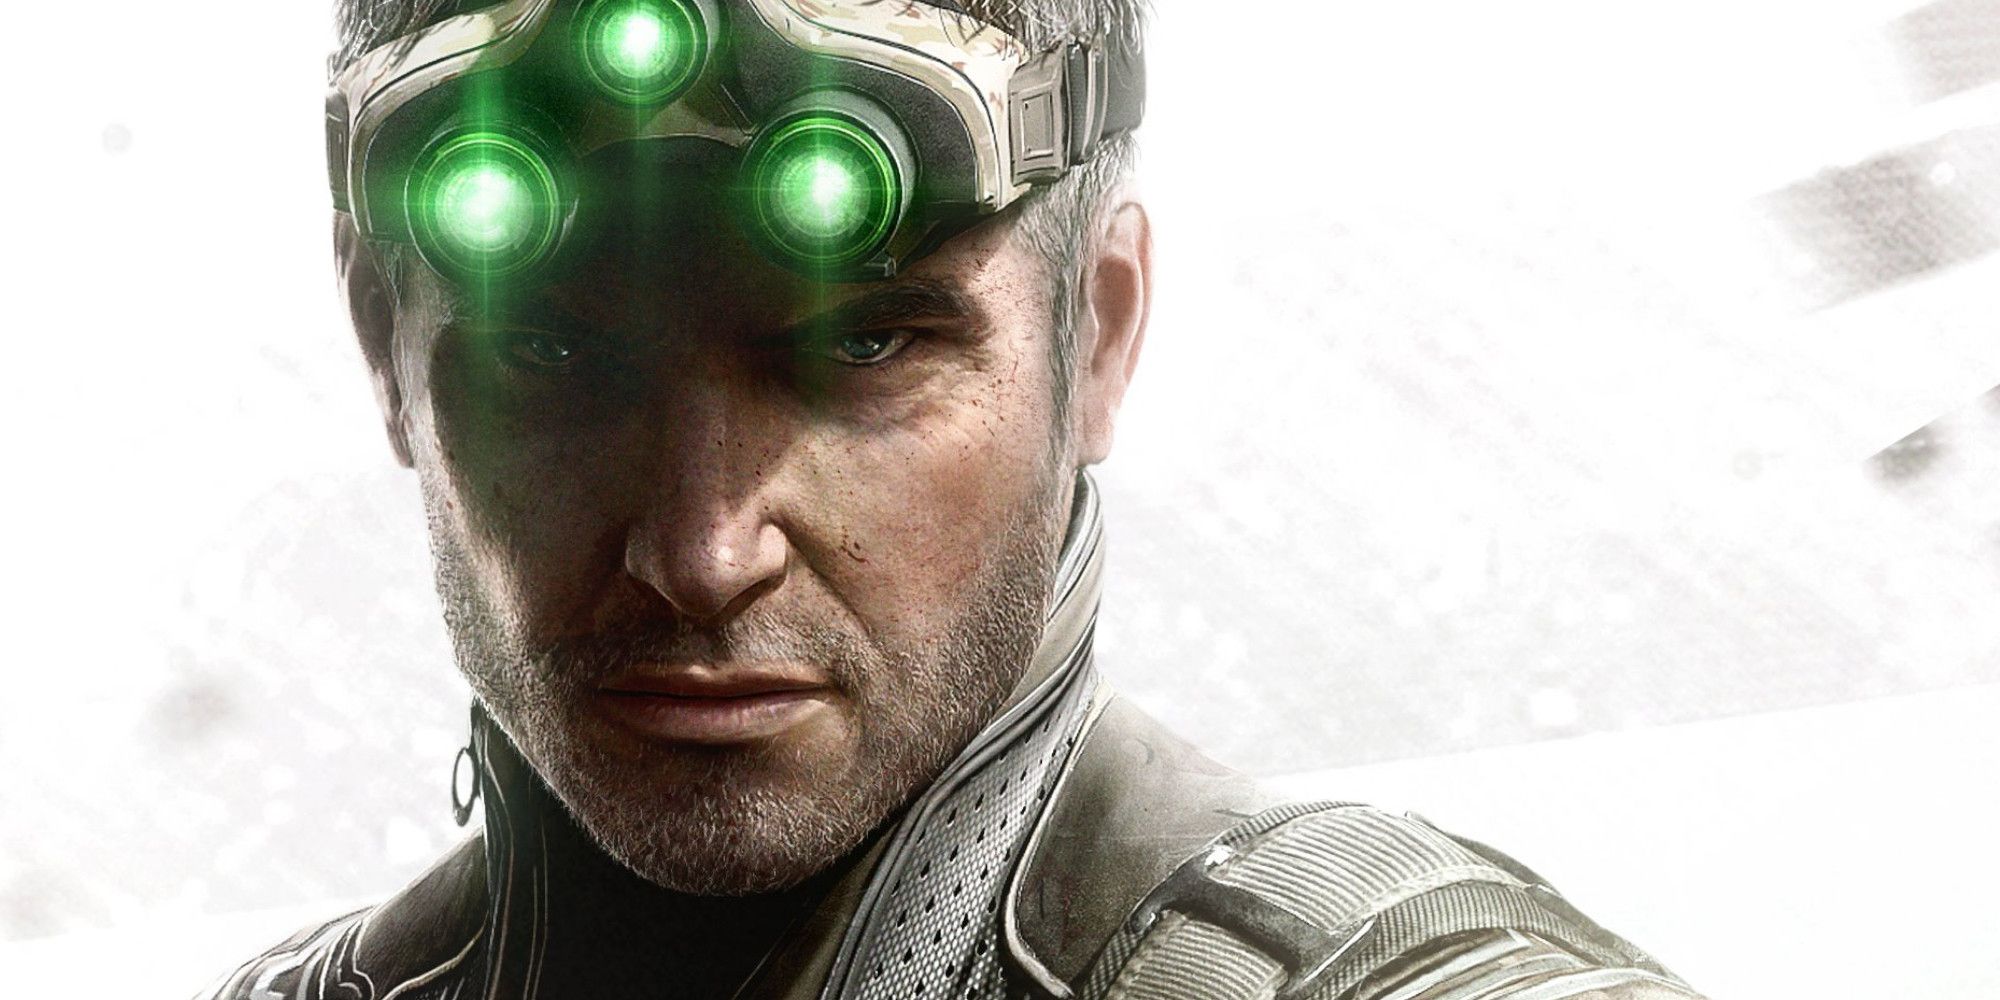 Sam Fisher stares at the camera while his night vision goggles are engaged